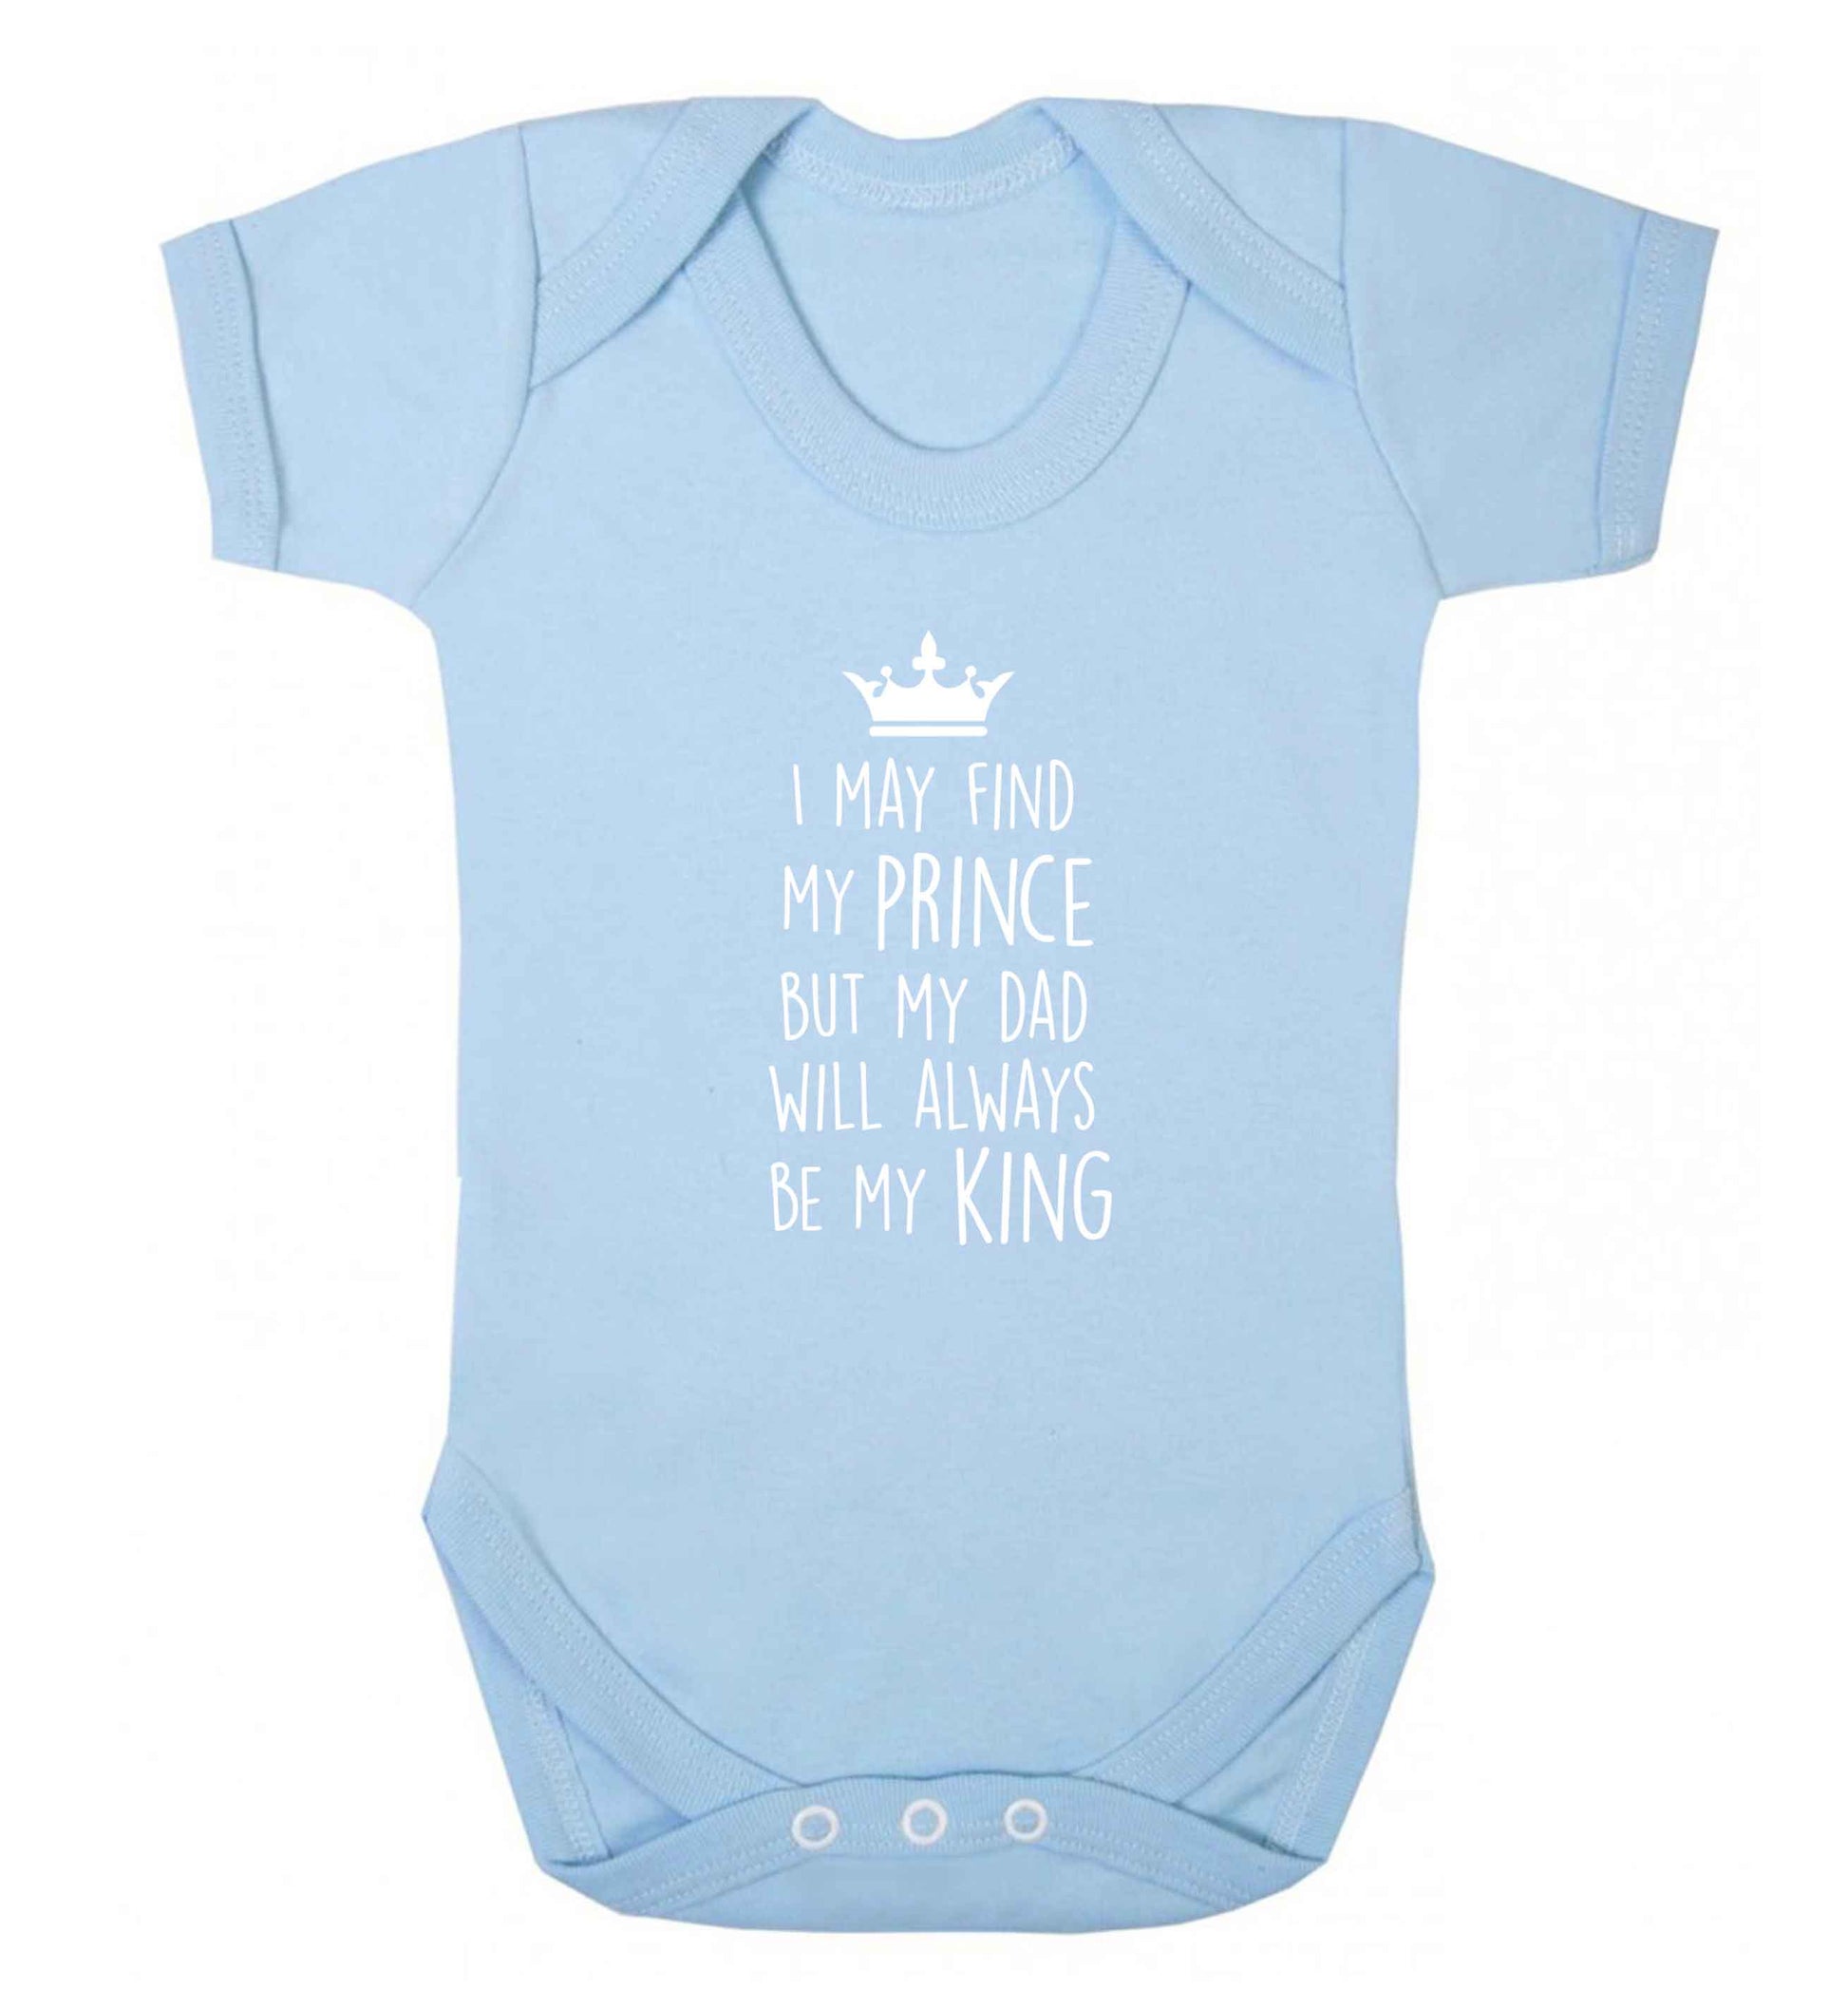 I may find my prince but my dad will always be my king baby vest pale blue 18-24 months